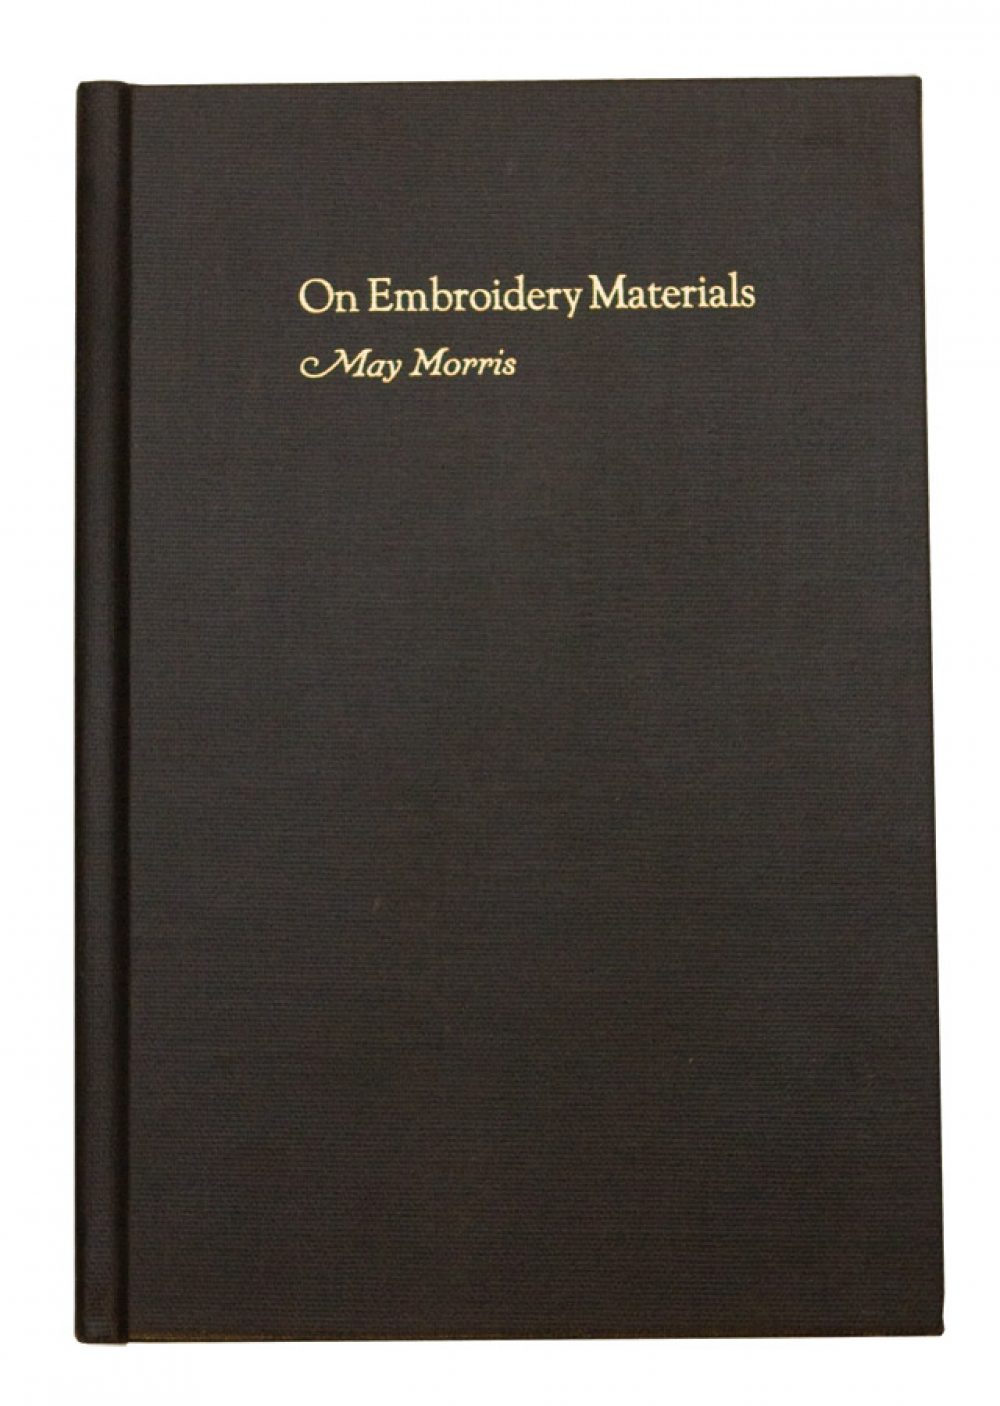 On Embroidery Materials (Hardcover) by May Morris